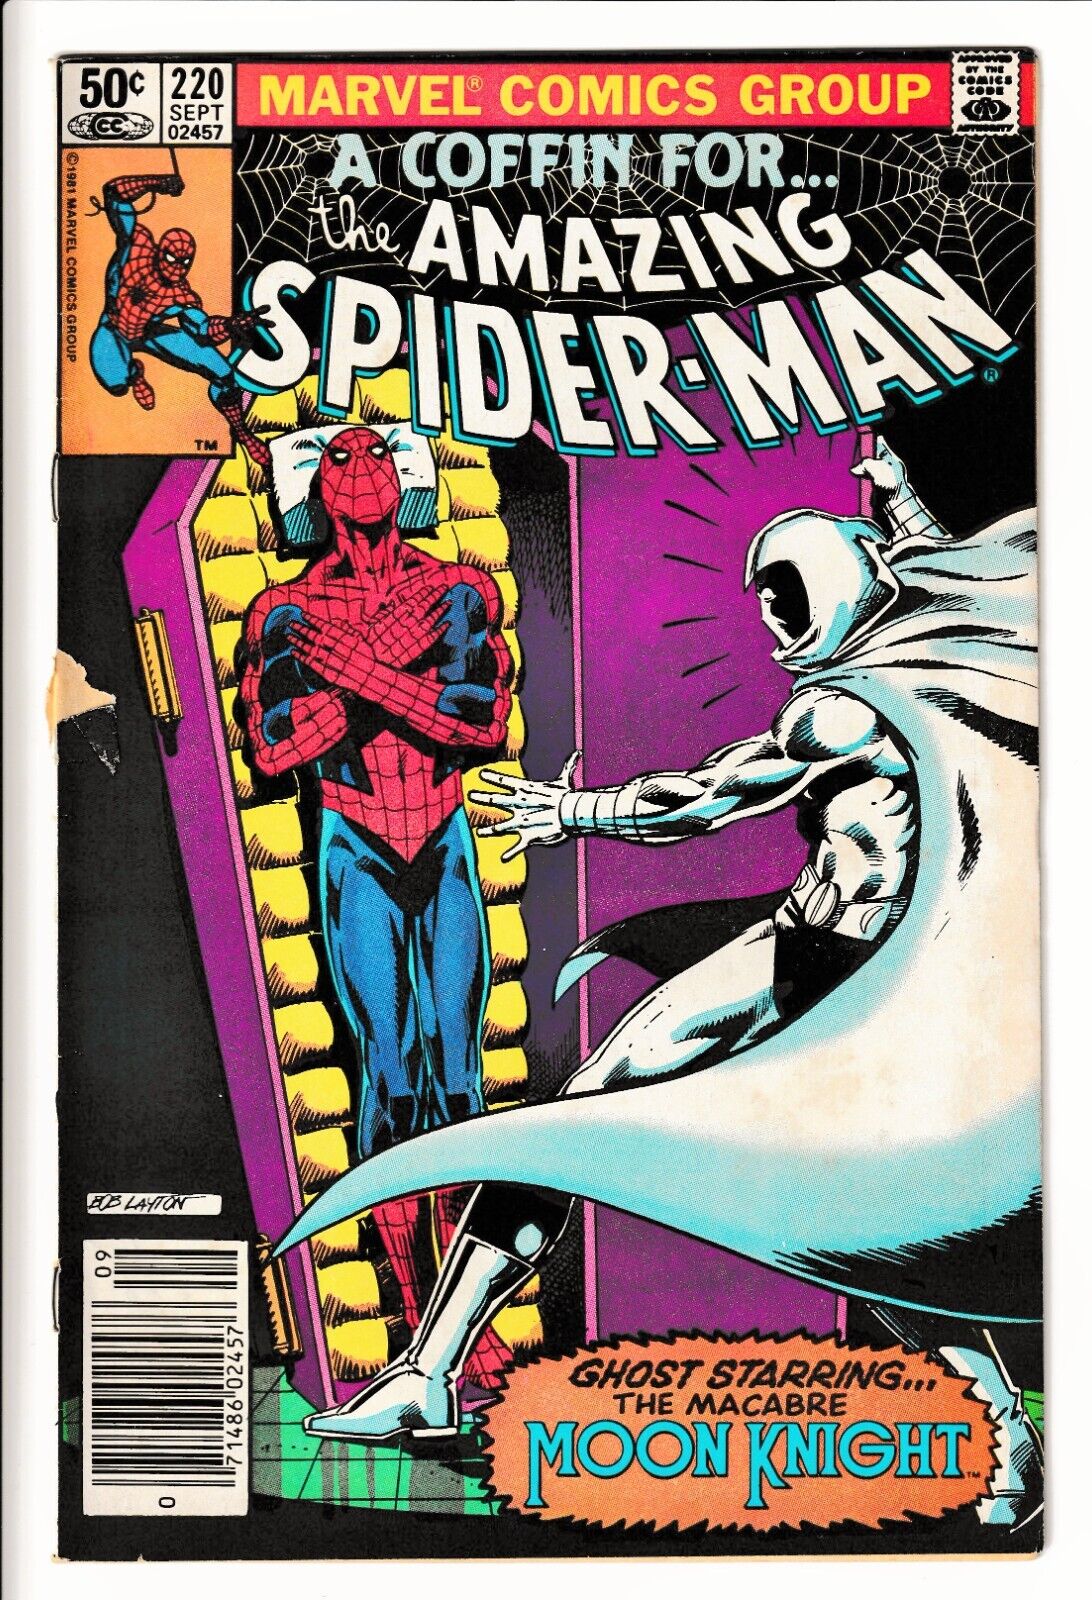 Amazing Spider-Man #220 (1981, Marvel) Early Team-Up of Moon Knight & Spider-Man